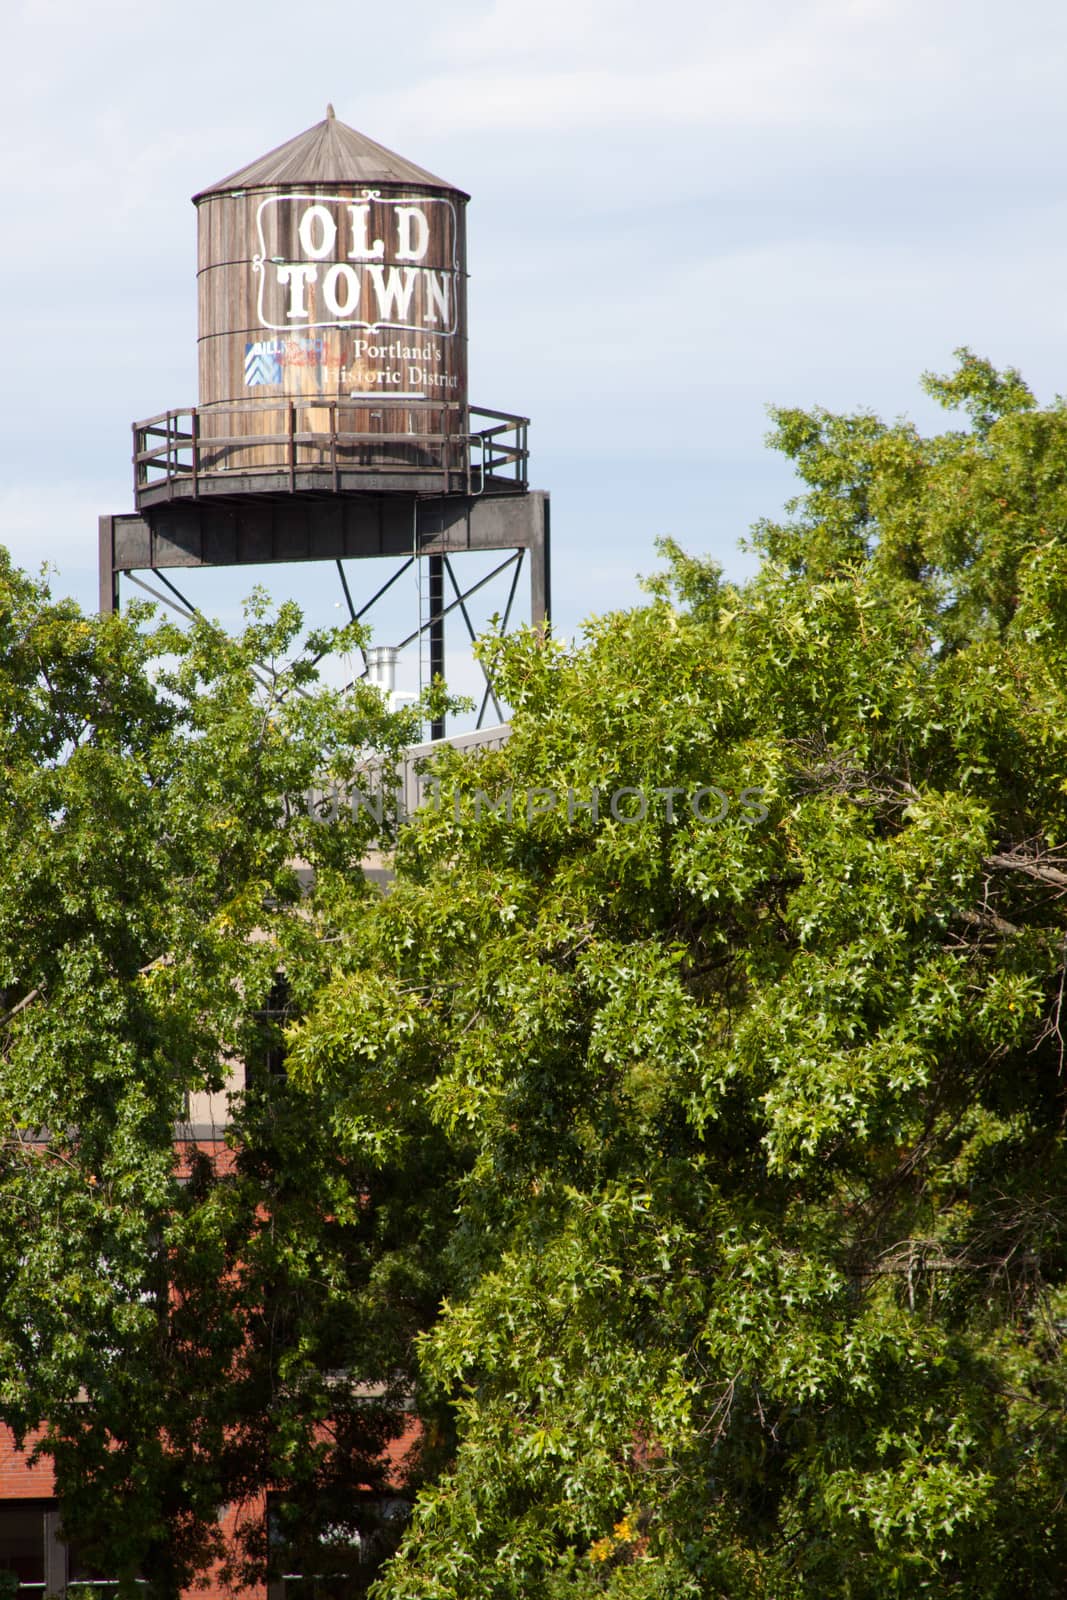 A tourist attraction in Oregon that is an old water tower and relic from the past.